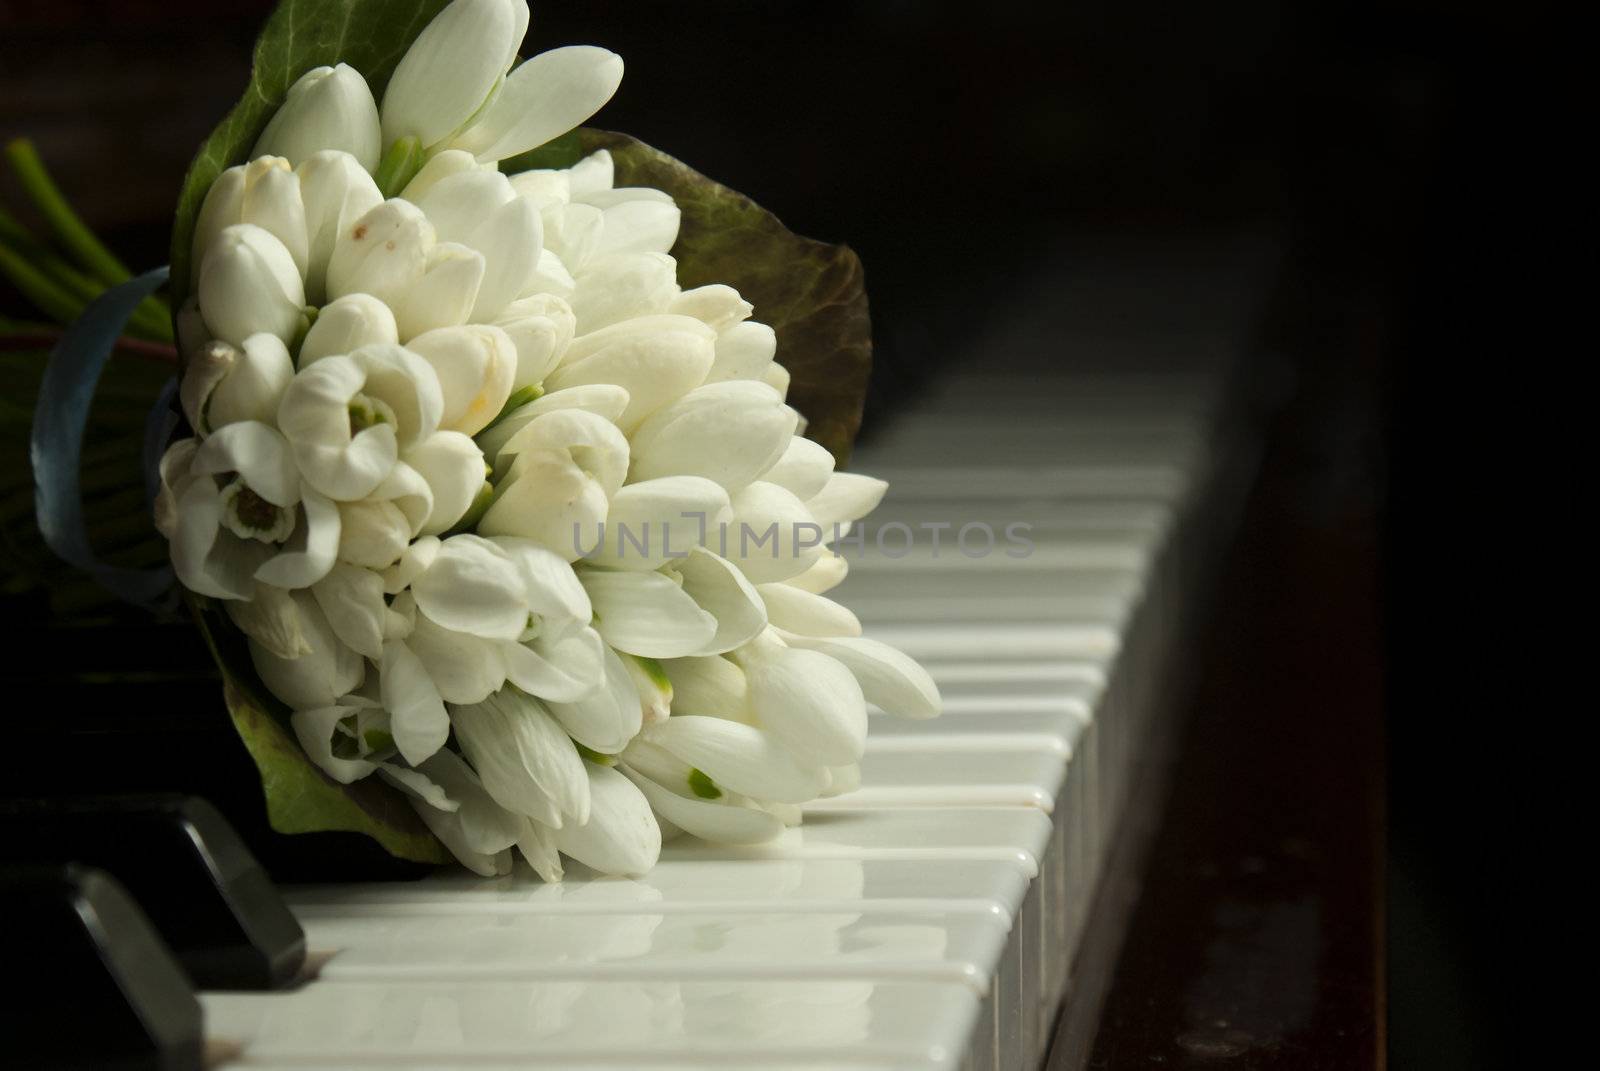 Bouquet of snowdrops laying on the piano keyboard